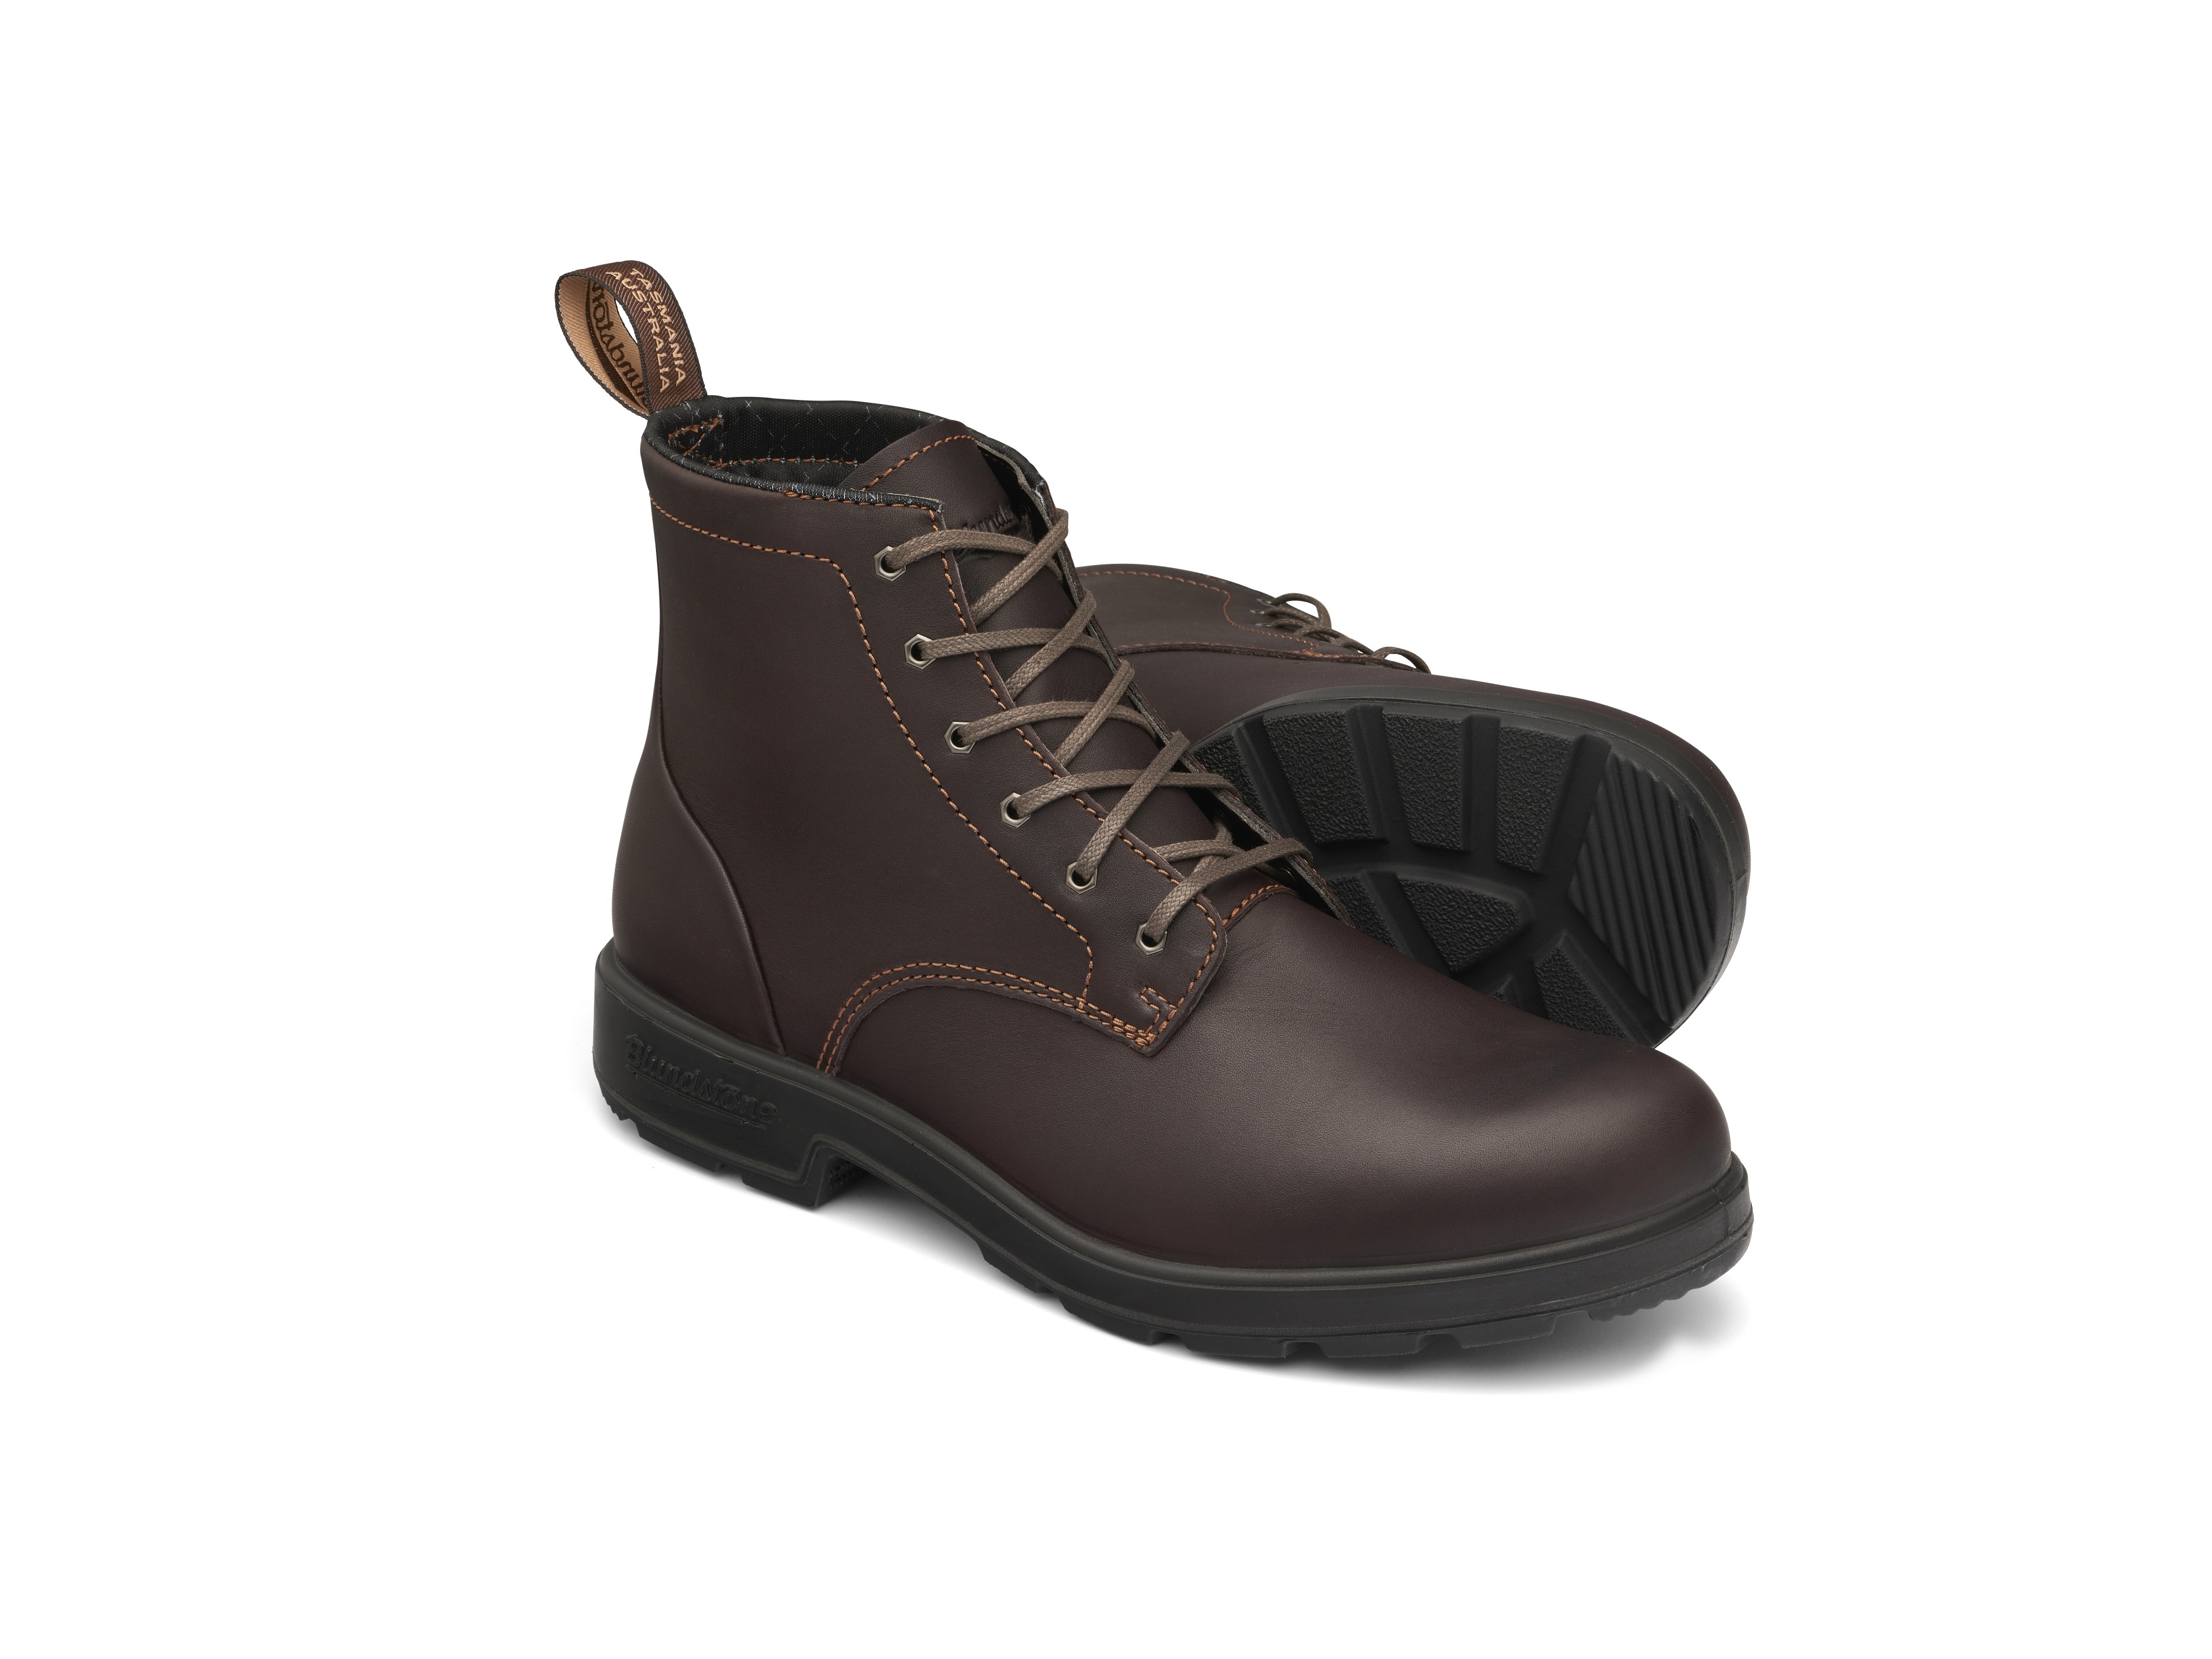 Blundstone Blundstone 1618 Stout Brown Water Resistant Leather (Originals Lace-Up) Leather